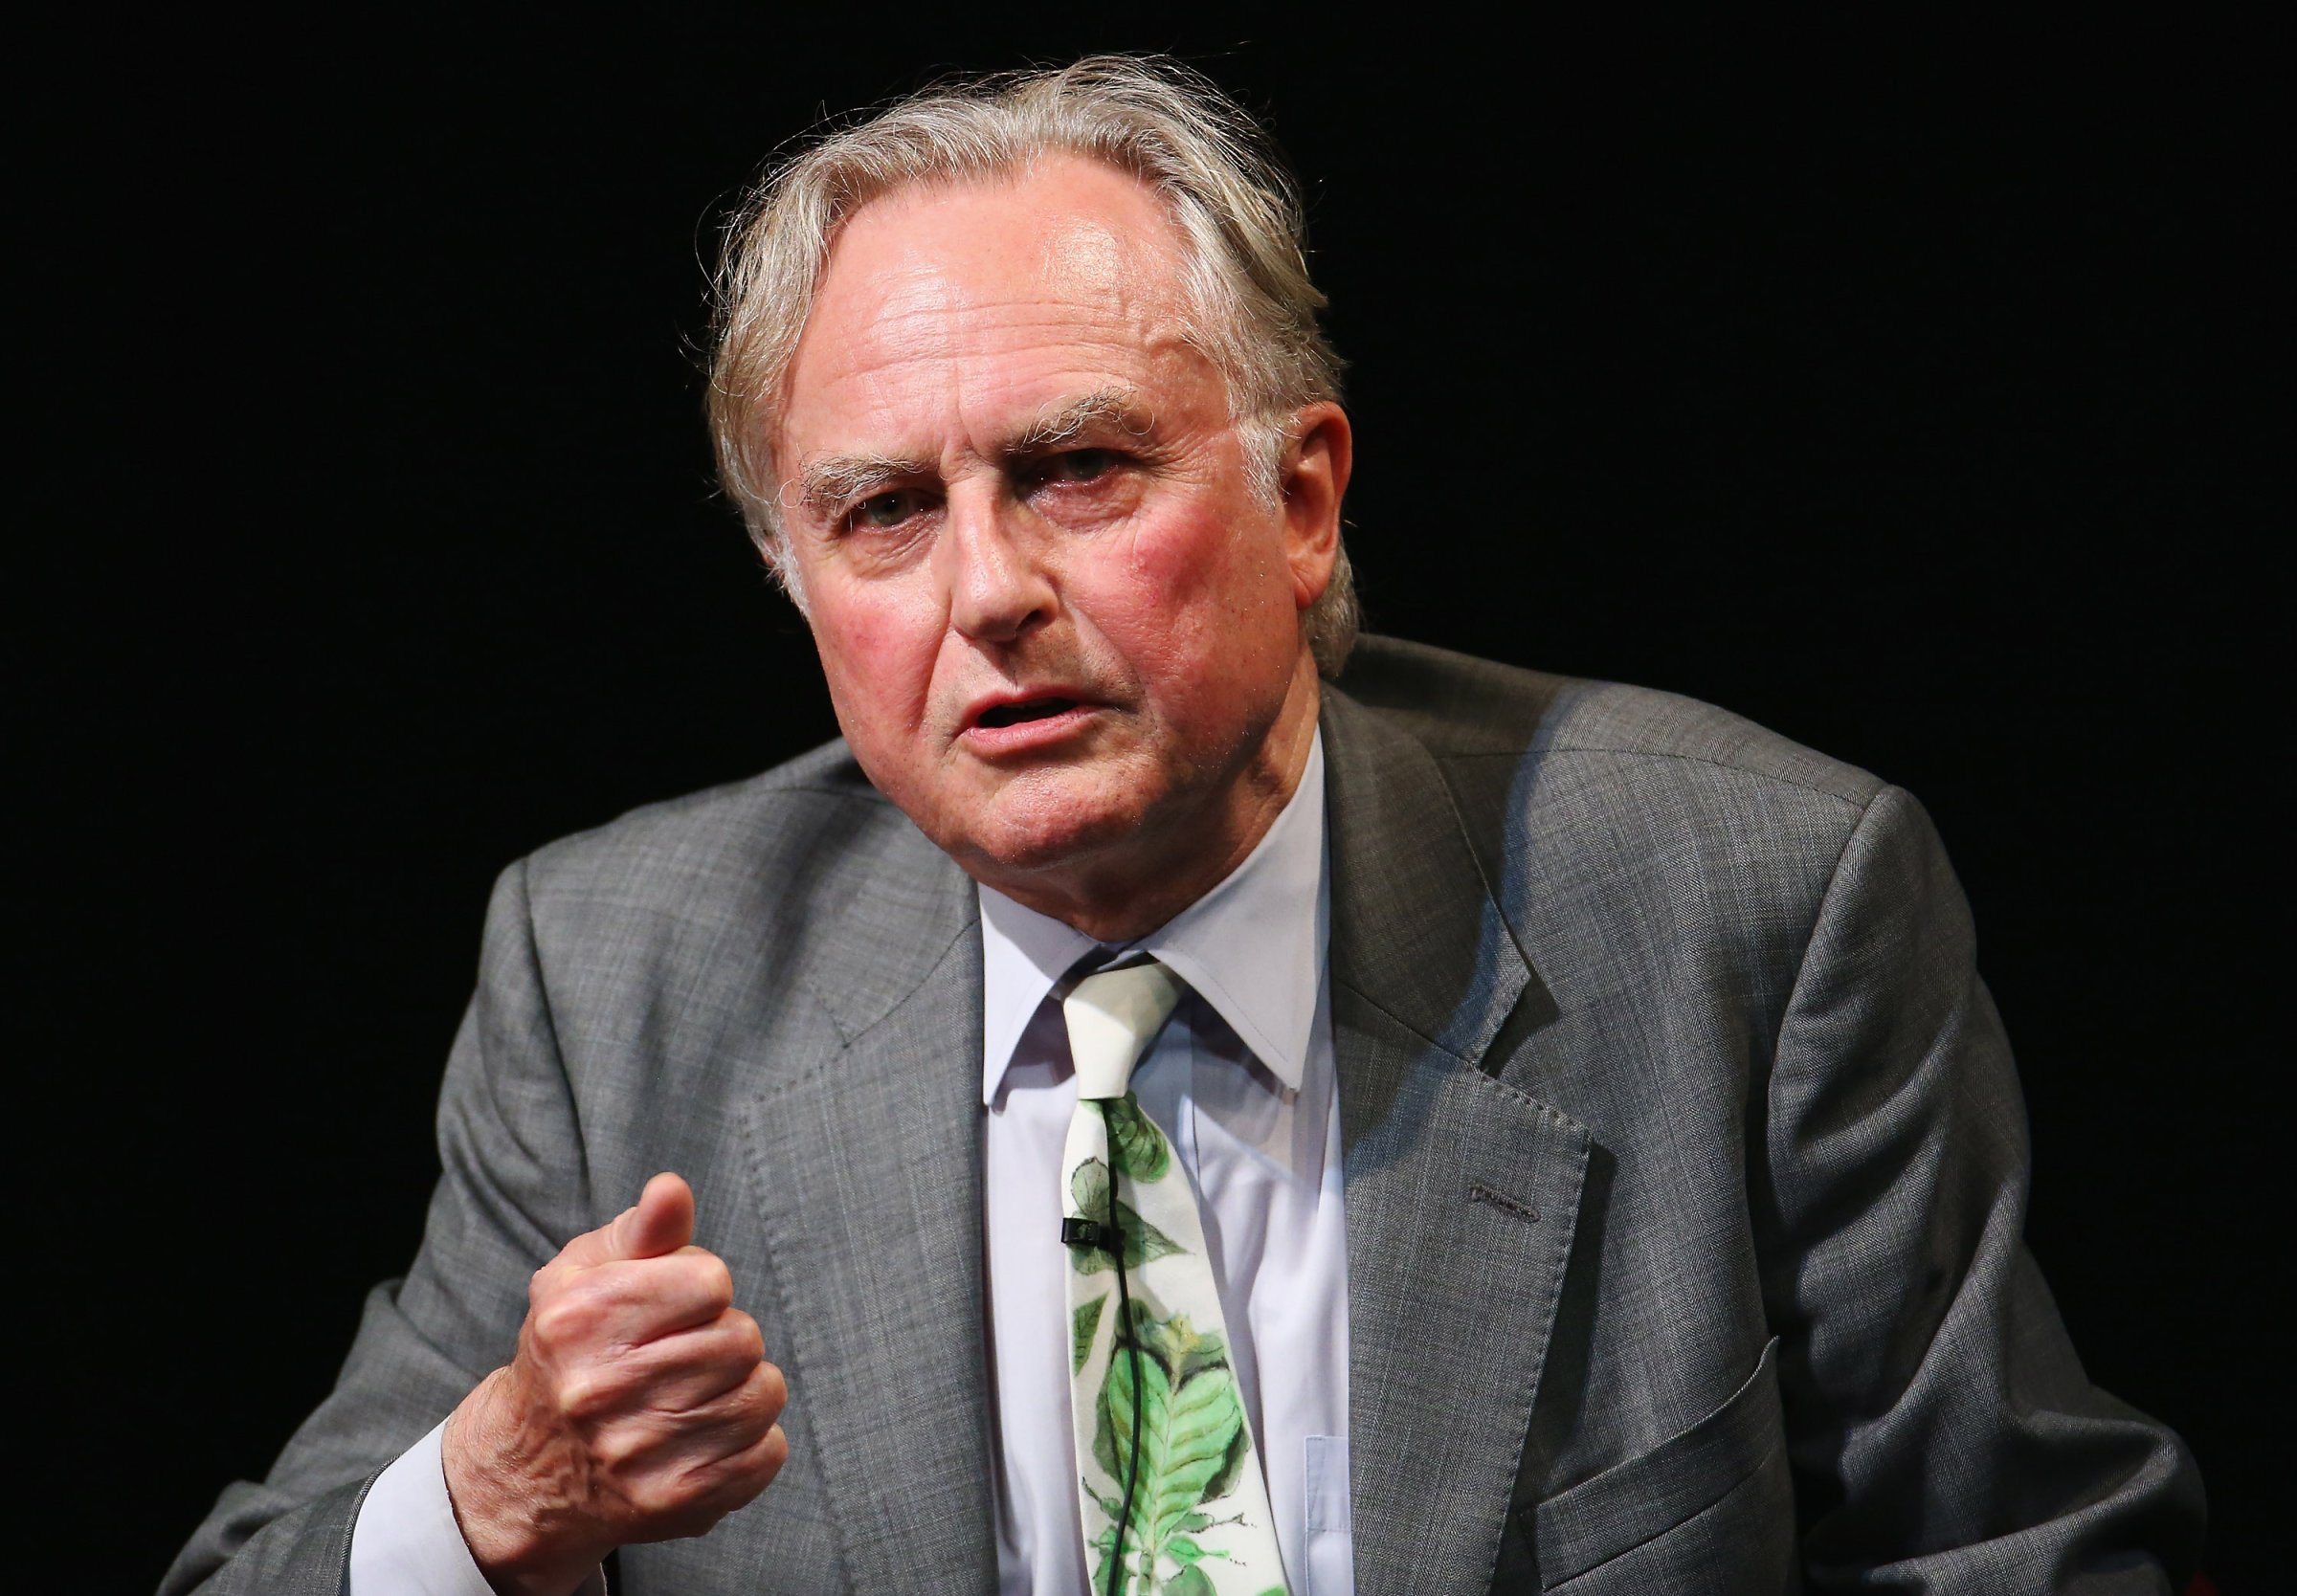 Richard Dawkins, founder of the Richard Dawkins Foundation for Reason and Science, promotes his new book at the Seymour Centre on December 4, 2014 in Sydney, Australia.